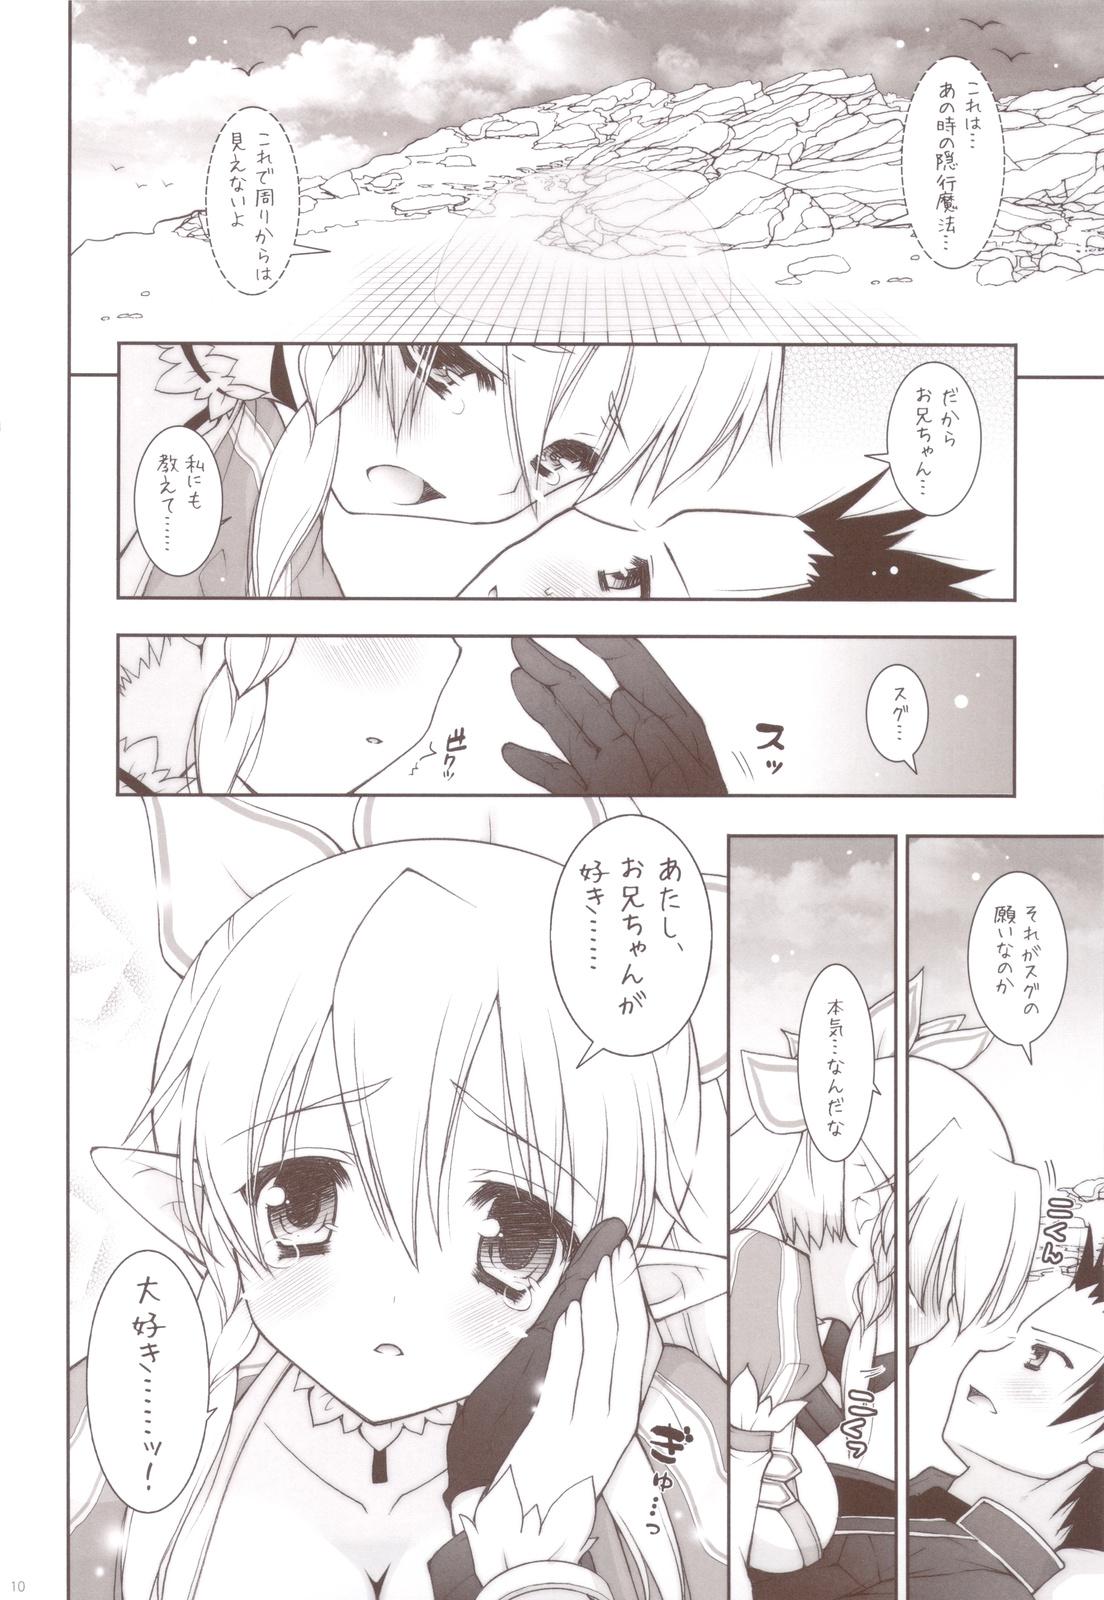 Cams Sex And Oppai + Omake Bon - Sword art online Teenage Sex - Page 9